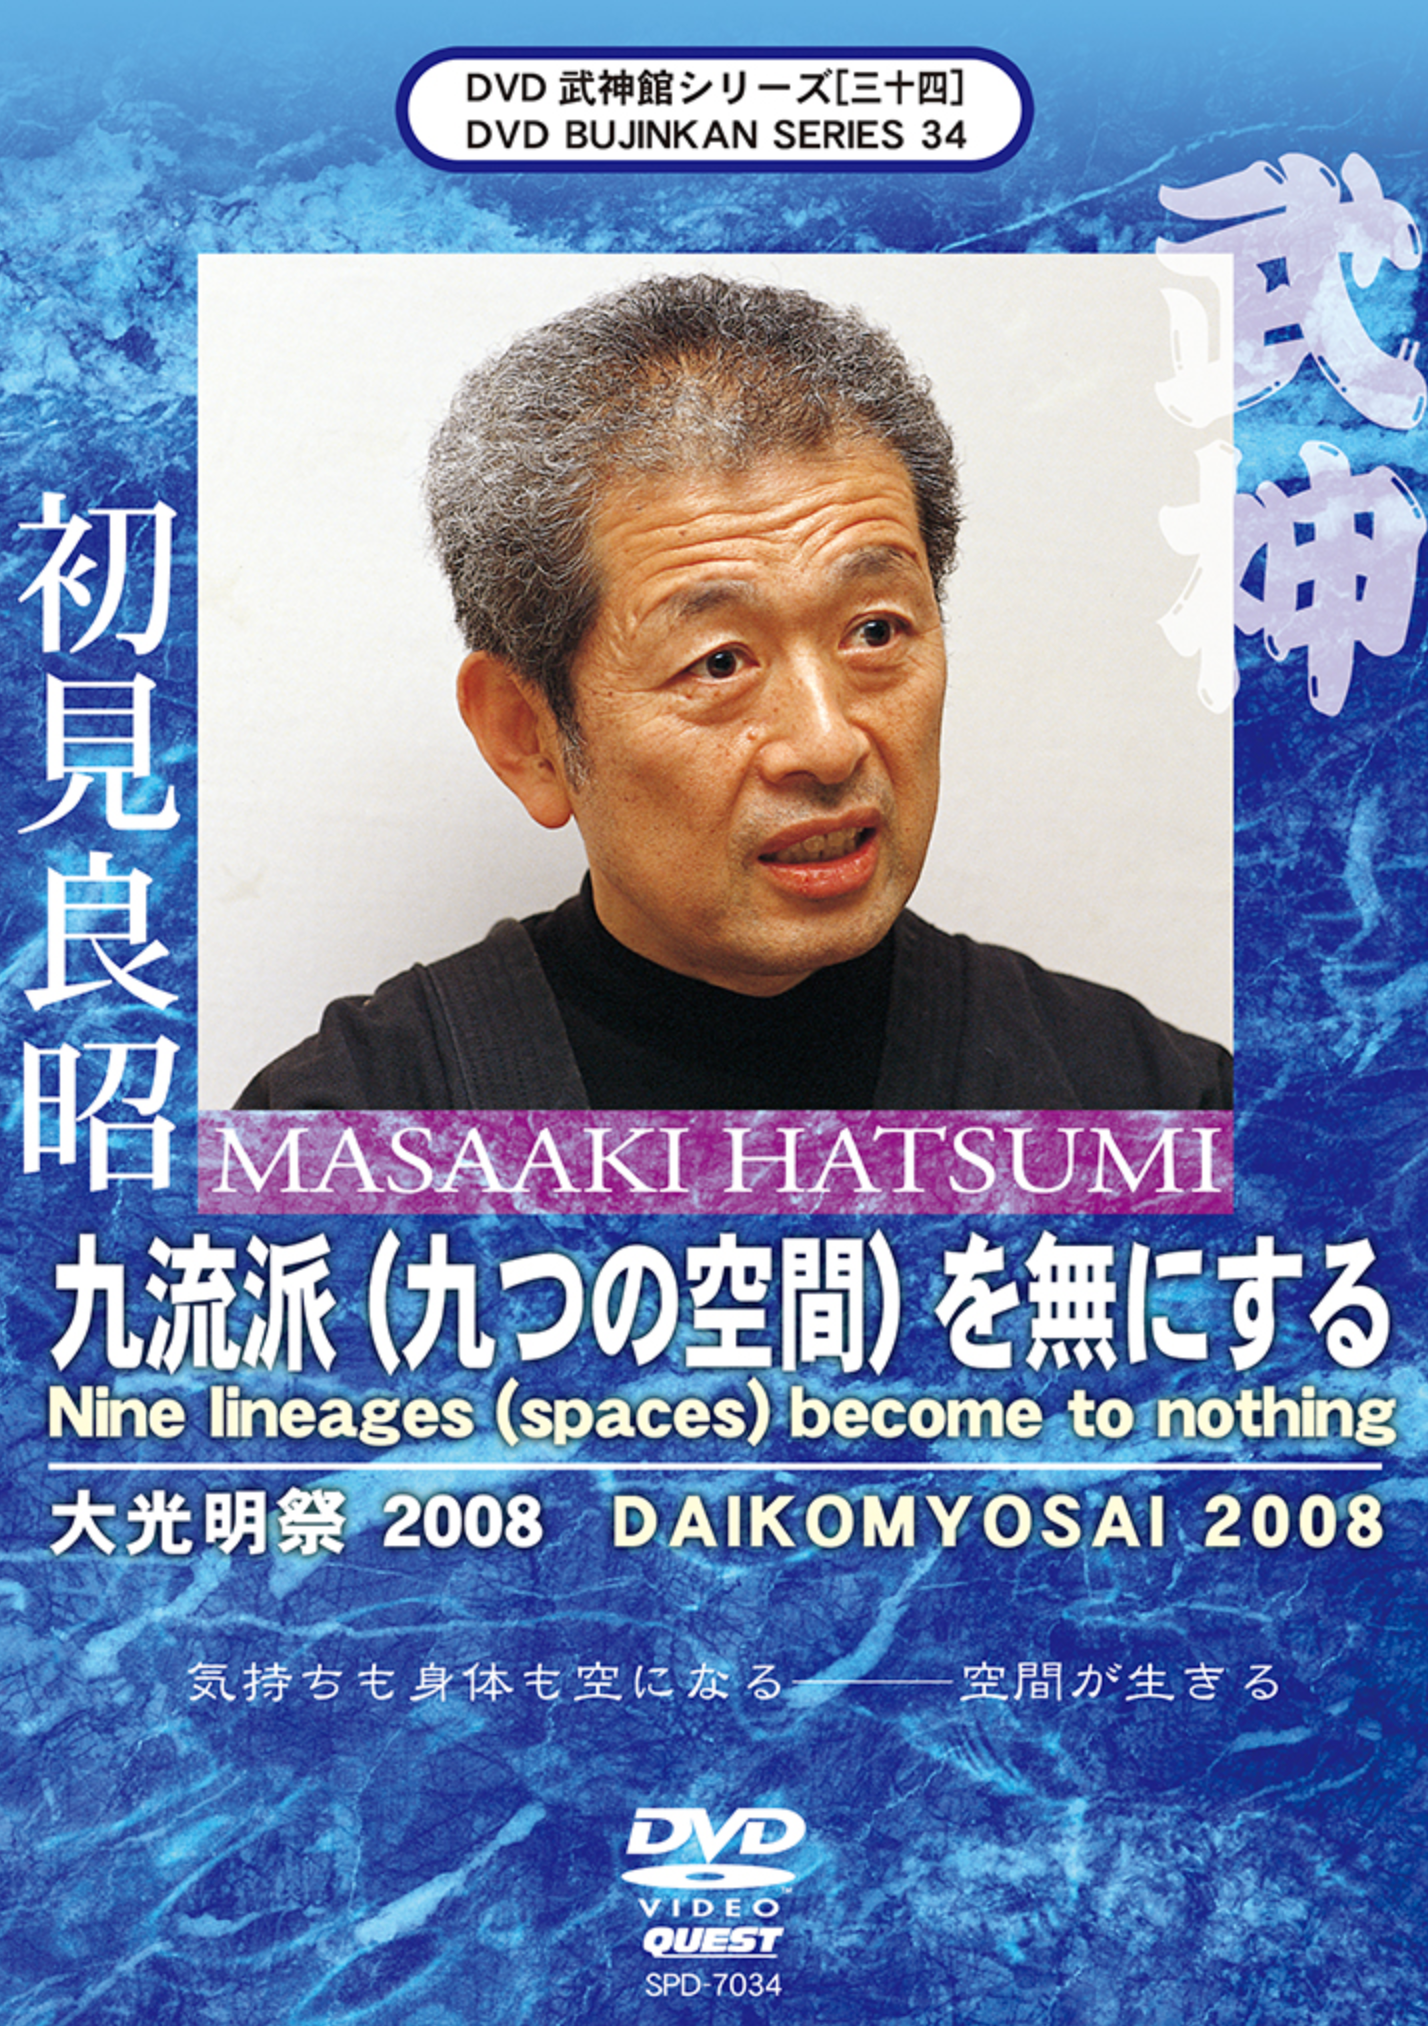 Bujinkan DVD Series 34: Nine Lineages to Become Nothing with Masaaki Hatsumi - Budovideos Inc